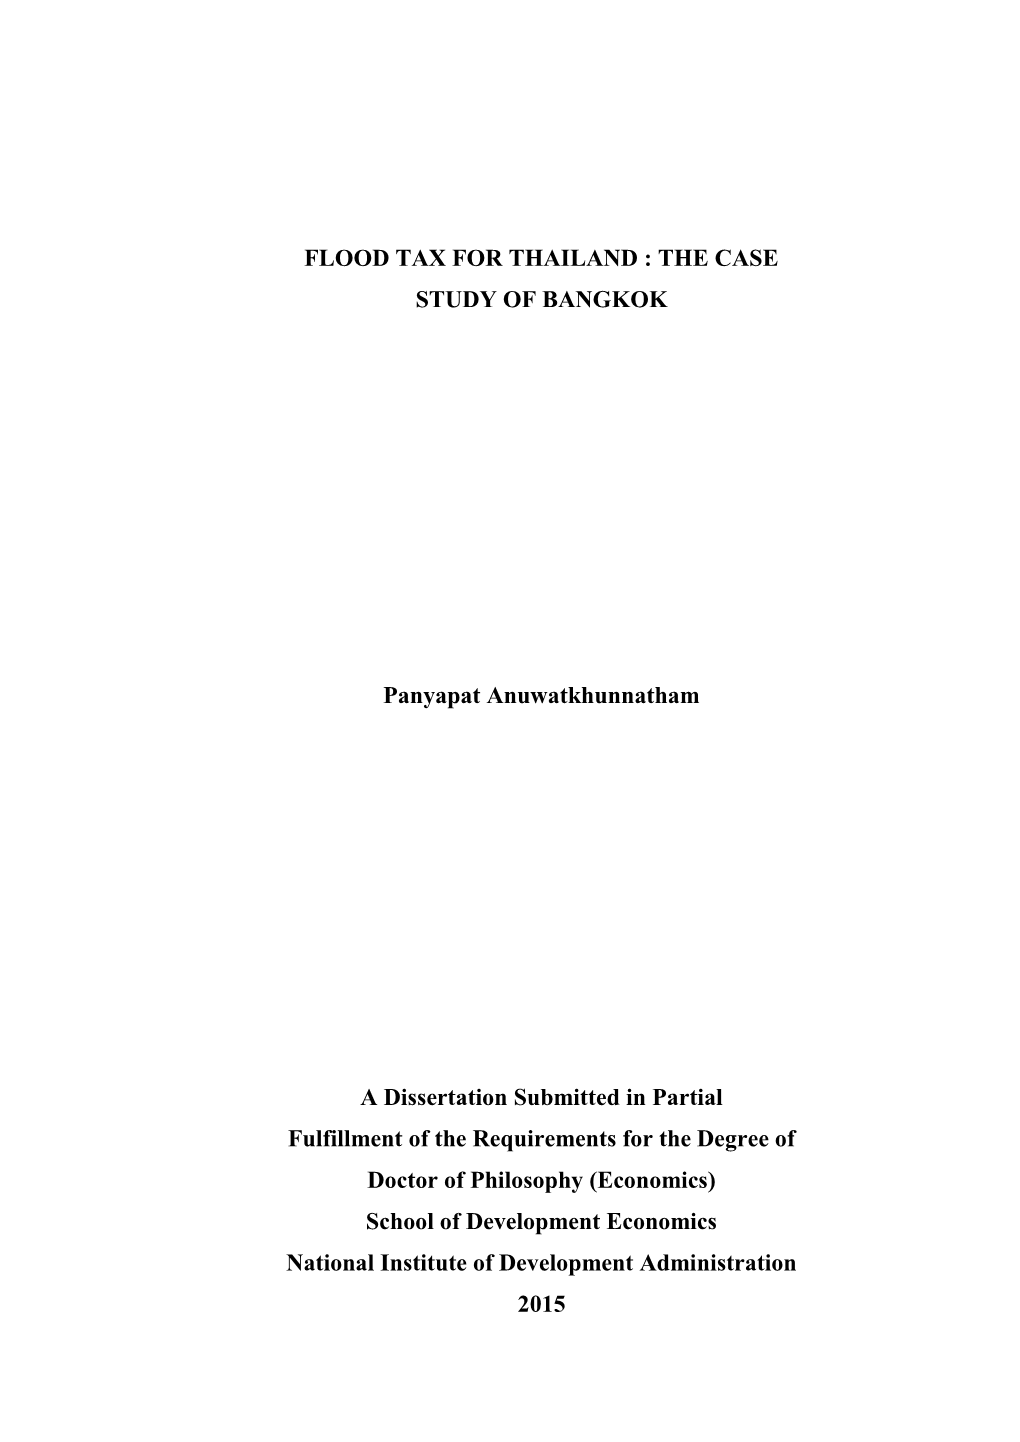 Flood Tax for Thailand : the Case Study of Bangkok